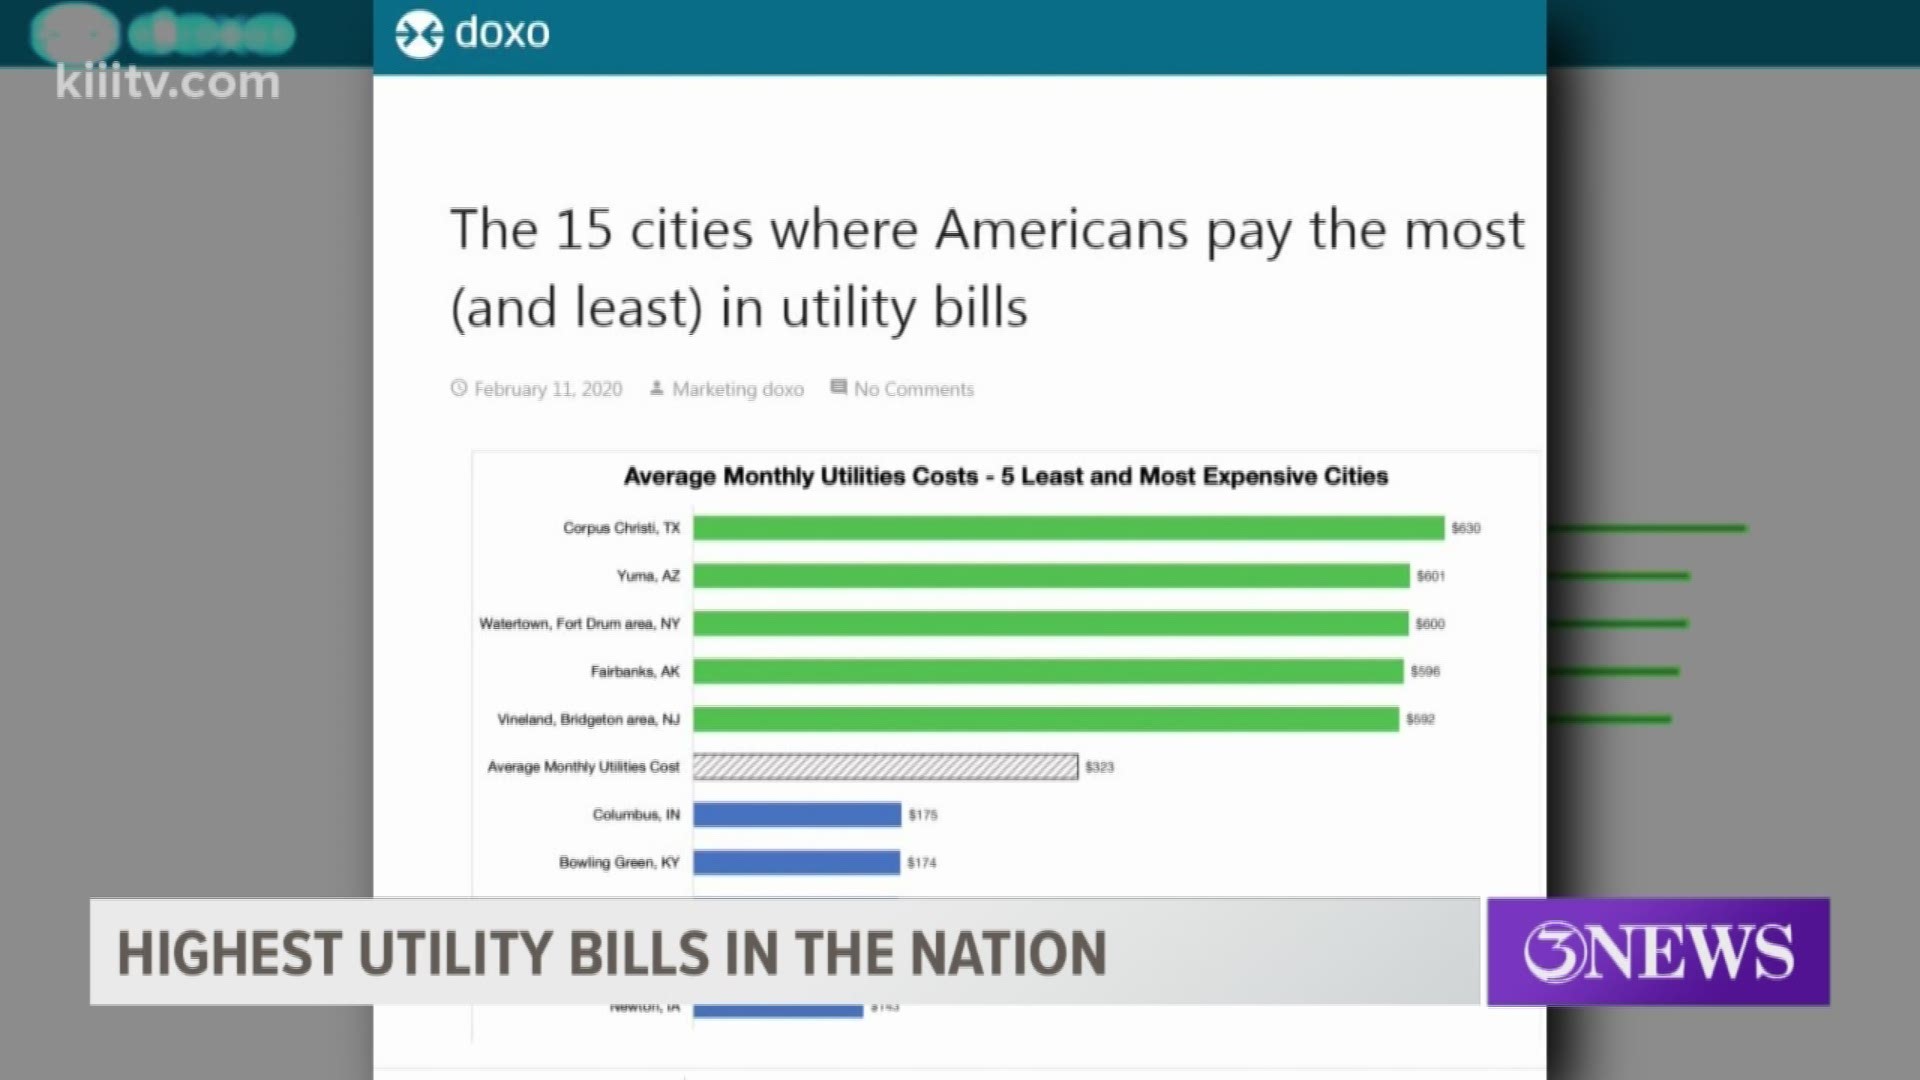 Corpus Christi is topping a national list as having the highest utility bills per customer in the nation, according to Doxo.com.